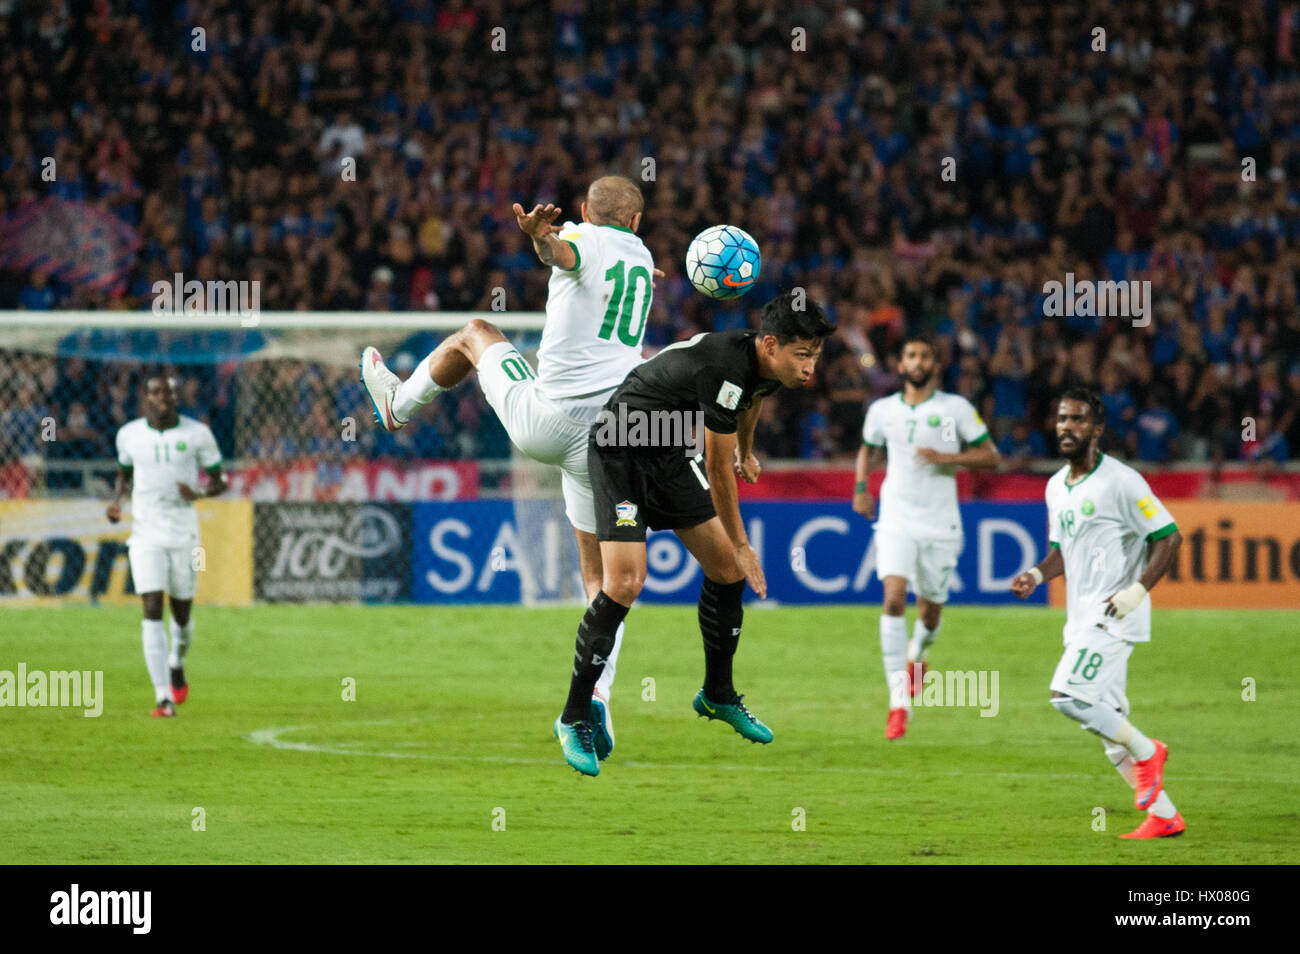 Bangkok, Thailand. 23rd Mar, 2017. 23 March, 2017. Tanaboon Kesarat (R) from Thailand vie for the ball during Mohammad Al-Sahlawi (L) of Saudi Arabia during 2018 FIFA World Cup Qualifier Group B match between Thailand and Saudi Arabia at the Rajamangala National Stadium in Bangkok, Thailand. Credit: Anusak Laowilas/Pacific Press/Alamy Live News Stock Photo